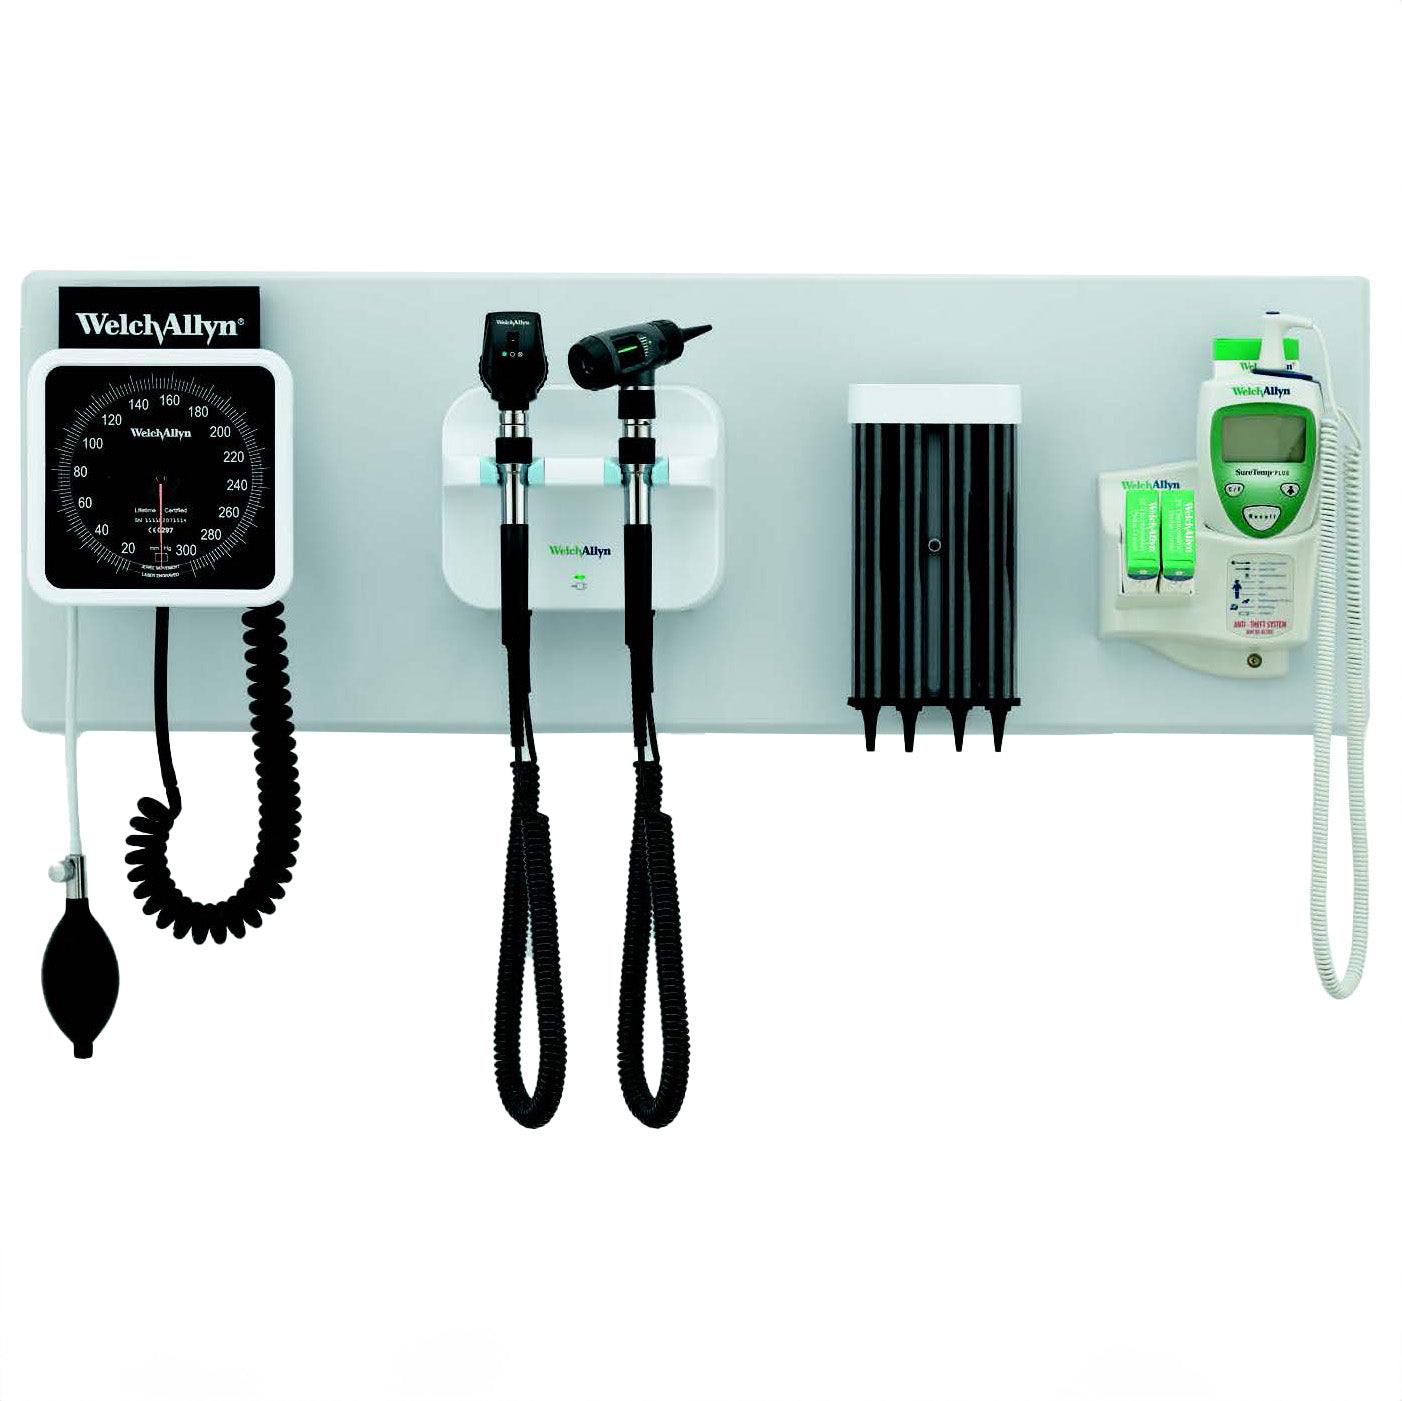 Welch Allyn Green Series 777 Integrated Wall Diagnostic System including Wall Aneroid Sphygmomanometer Welch Allyn